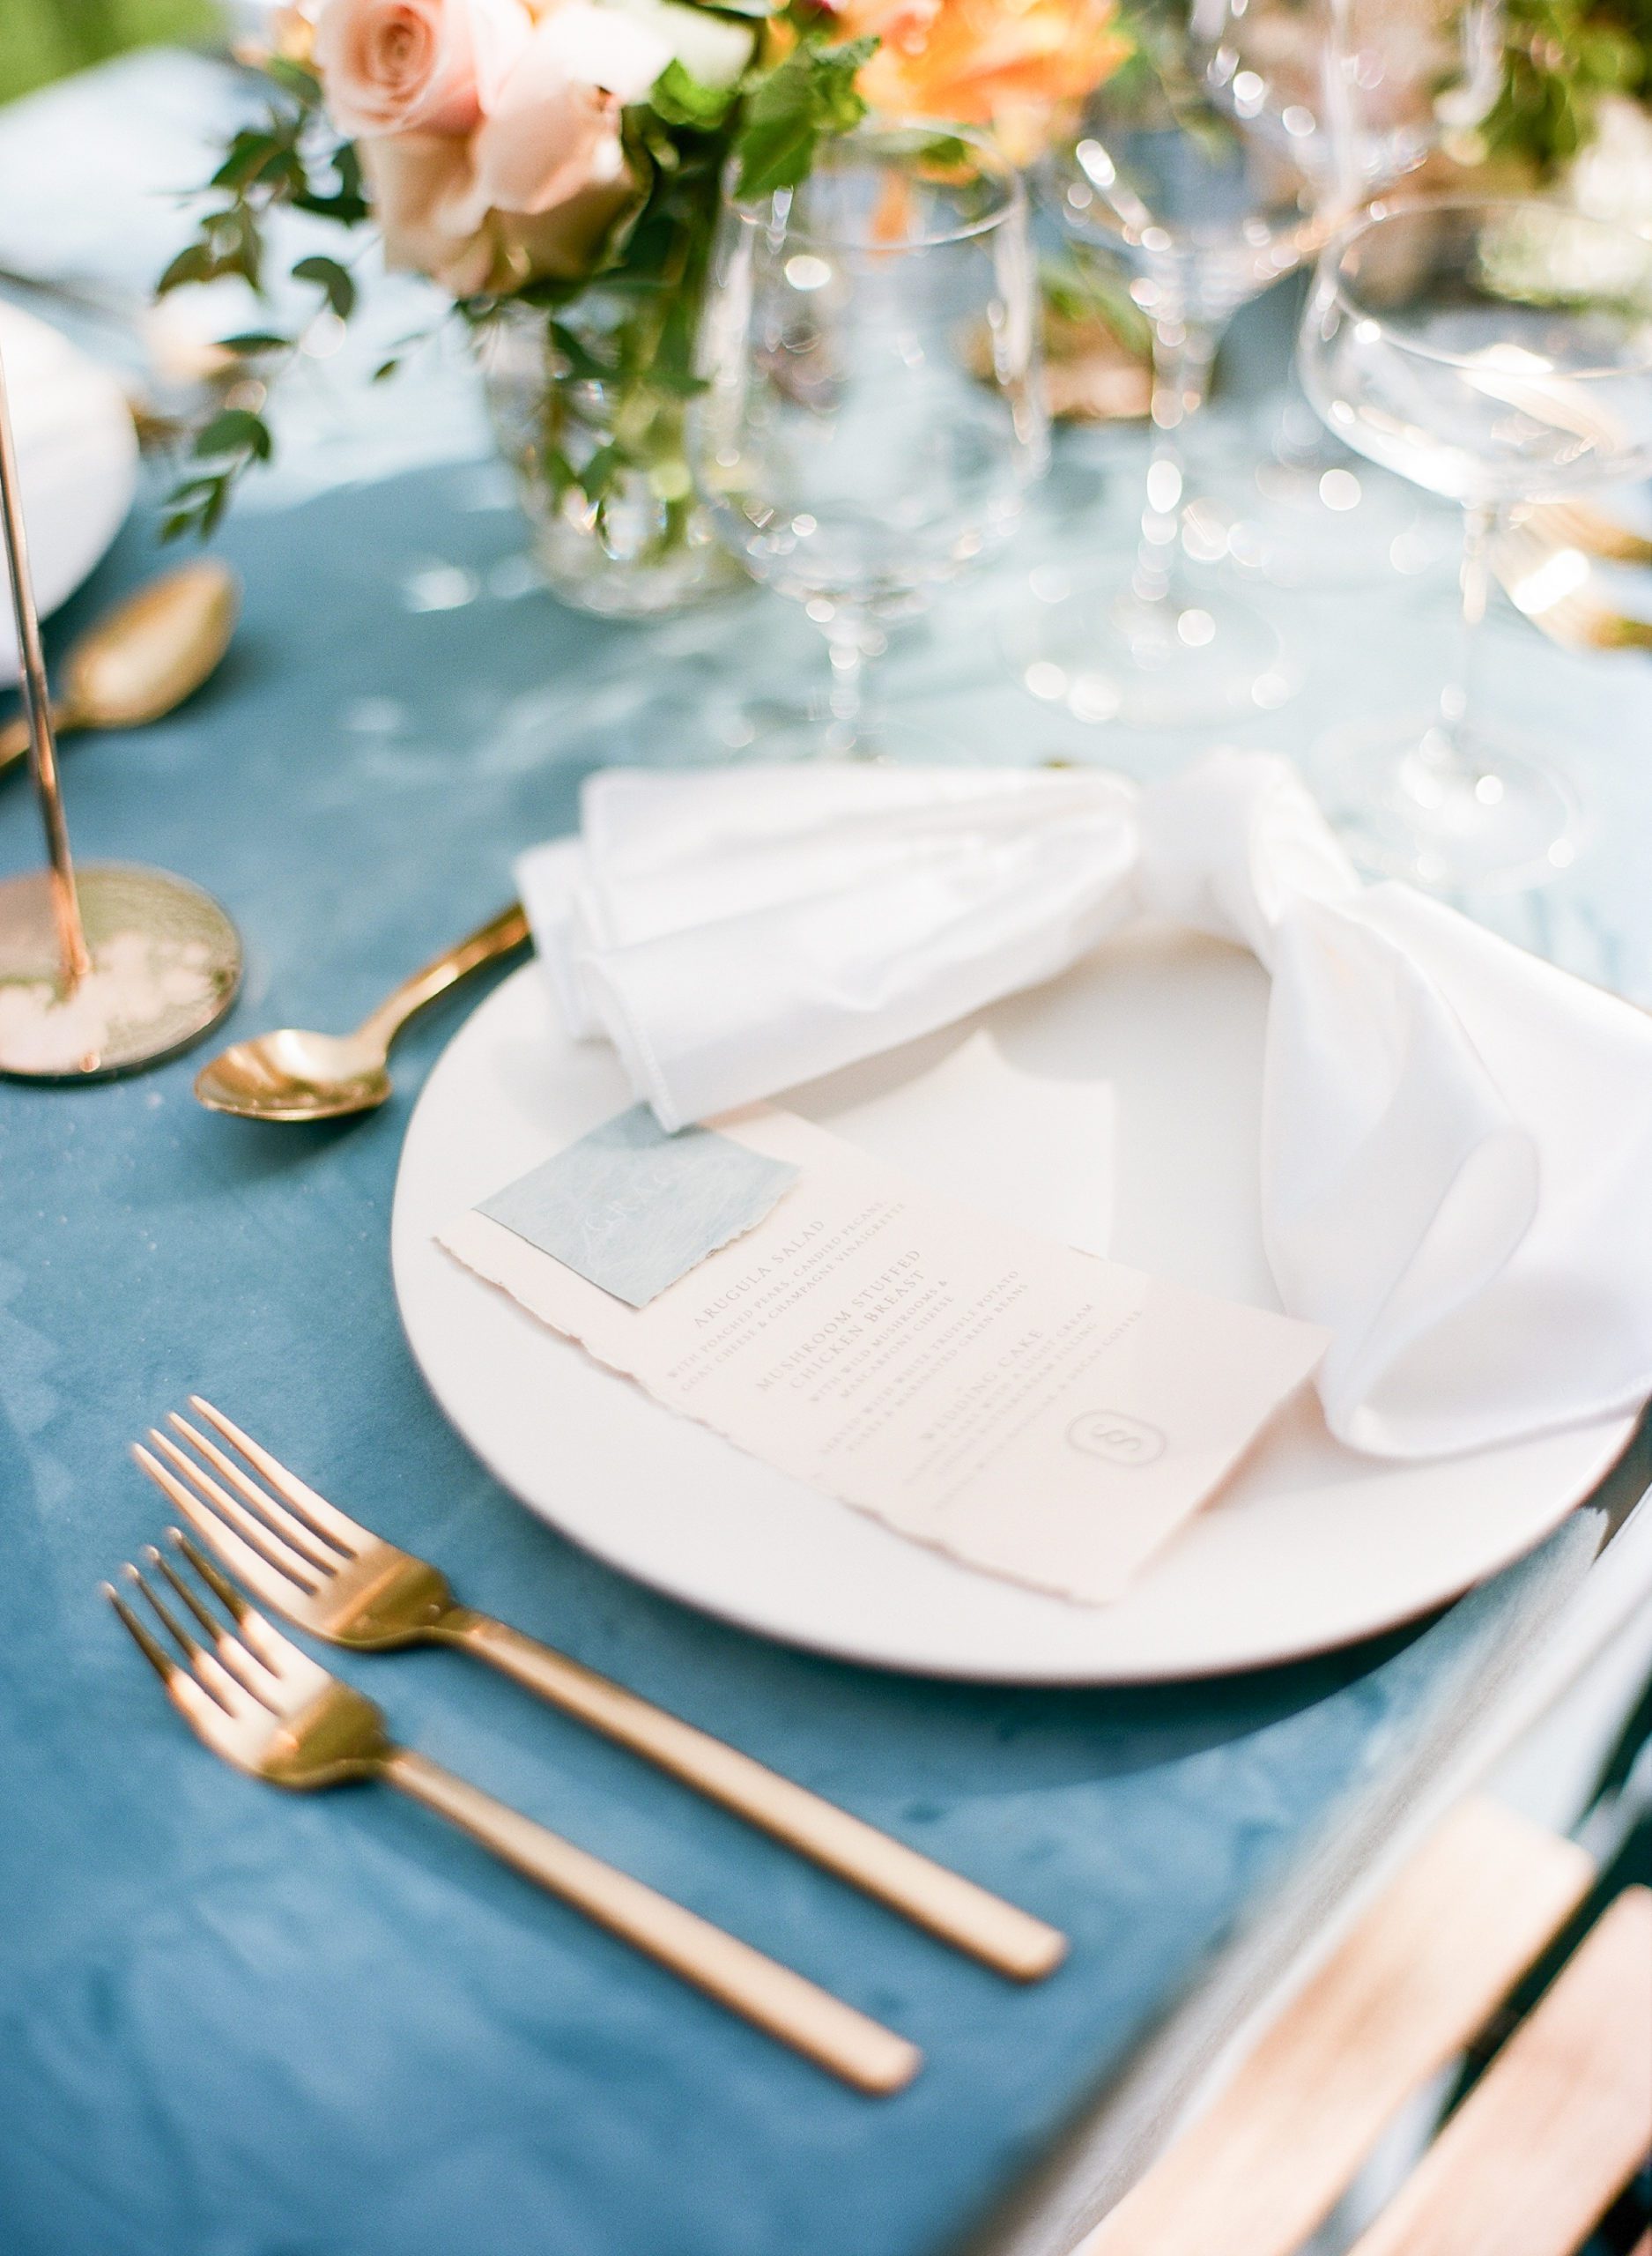 Wedding Reception Table with Blue Velvet Tablecloth Place Setting Photo